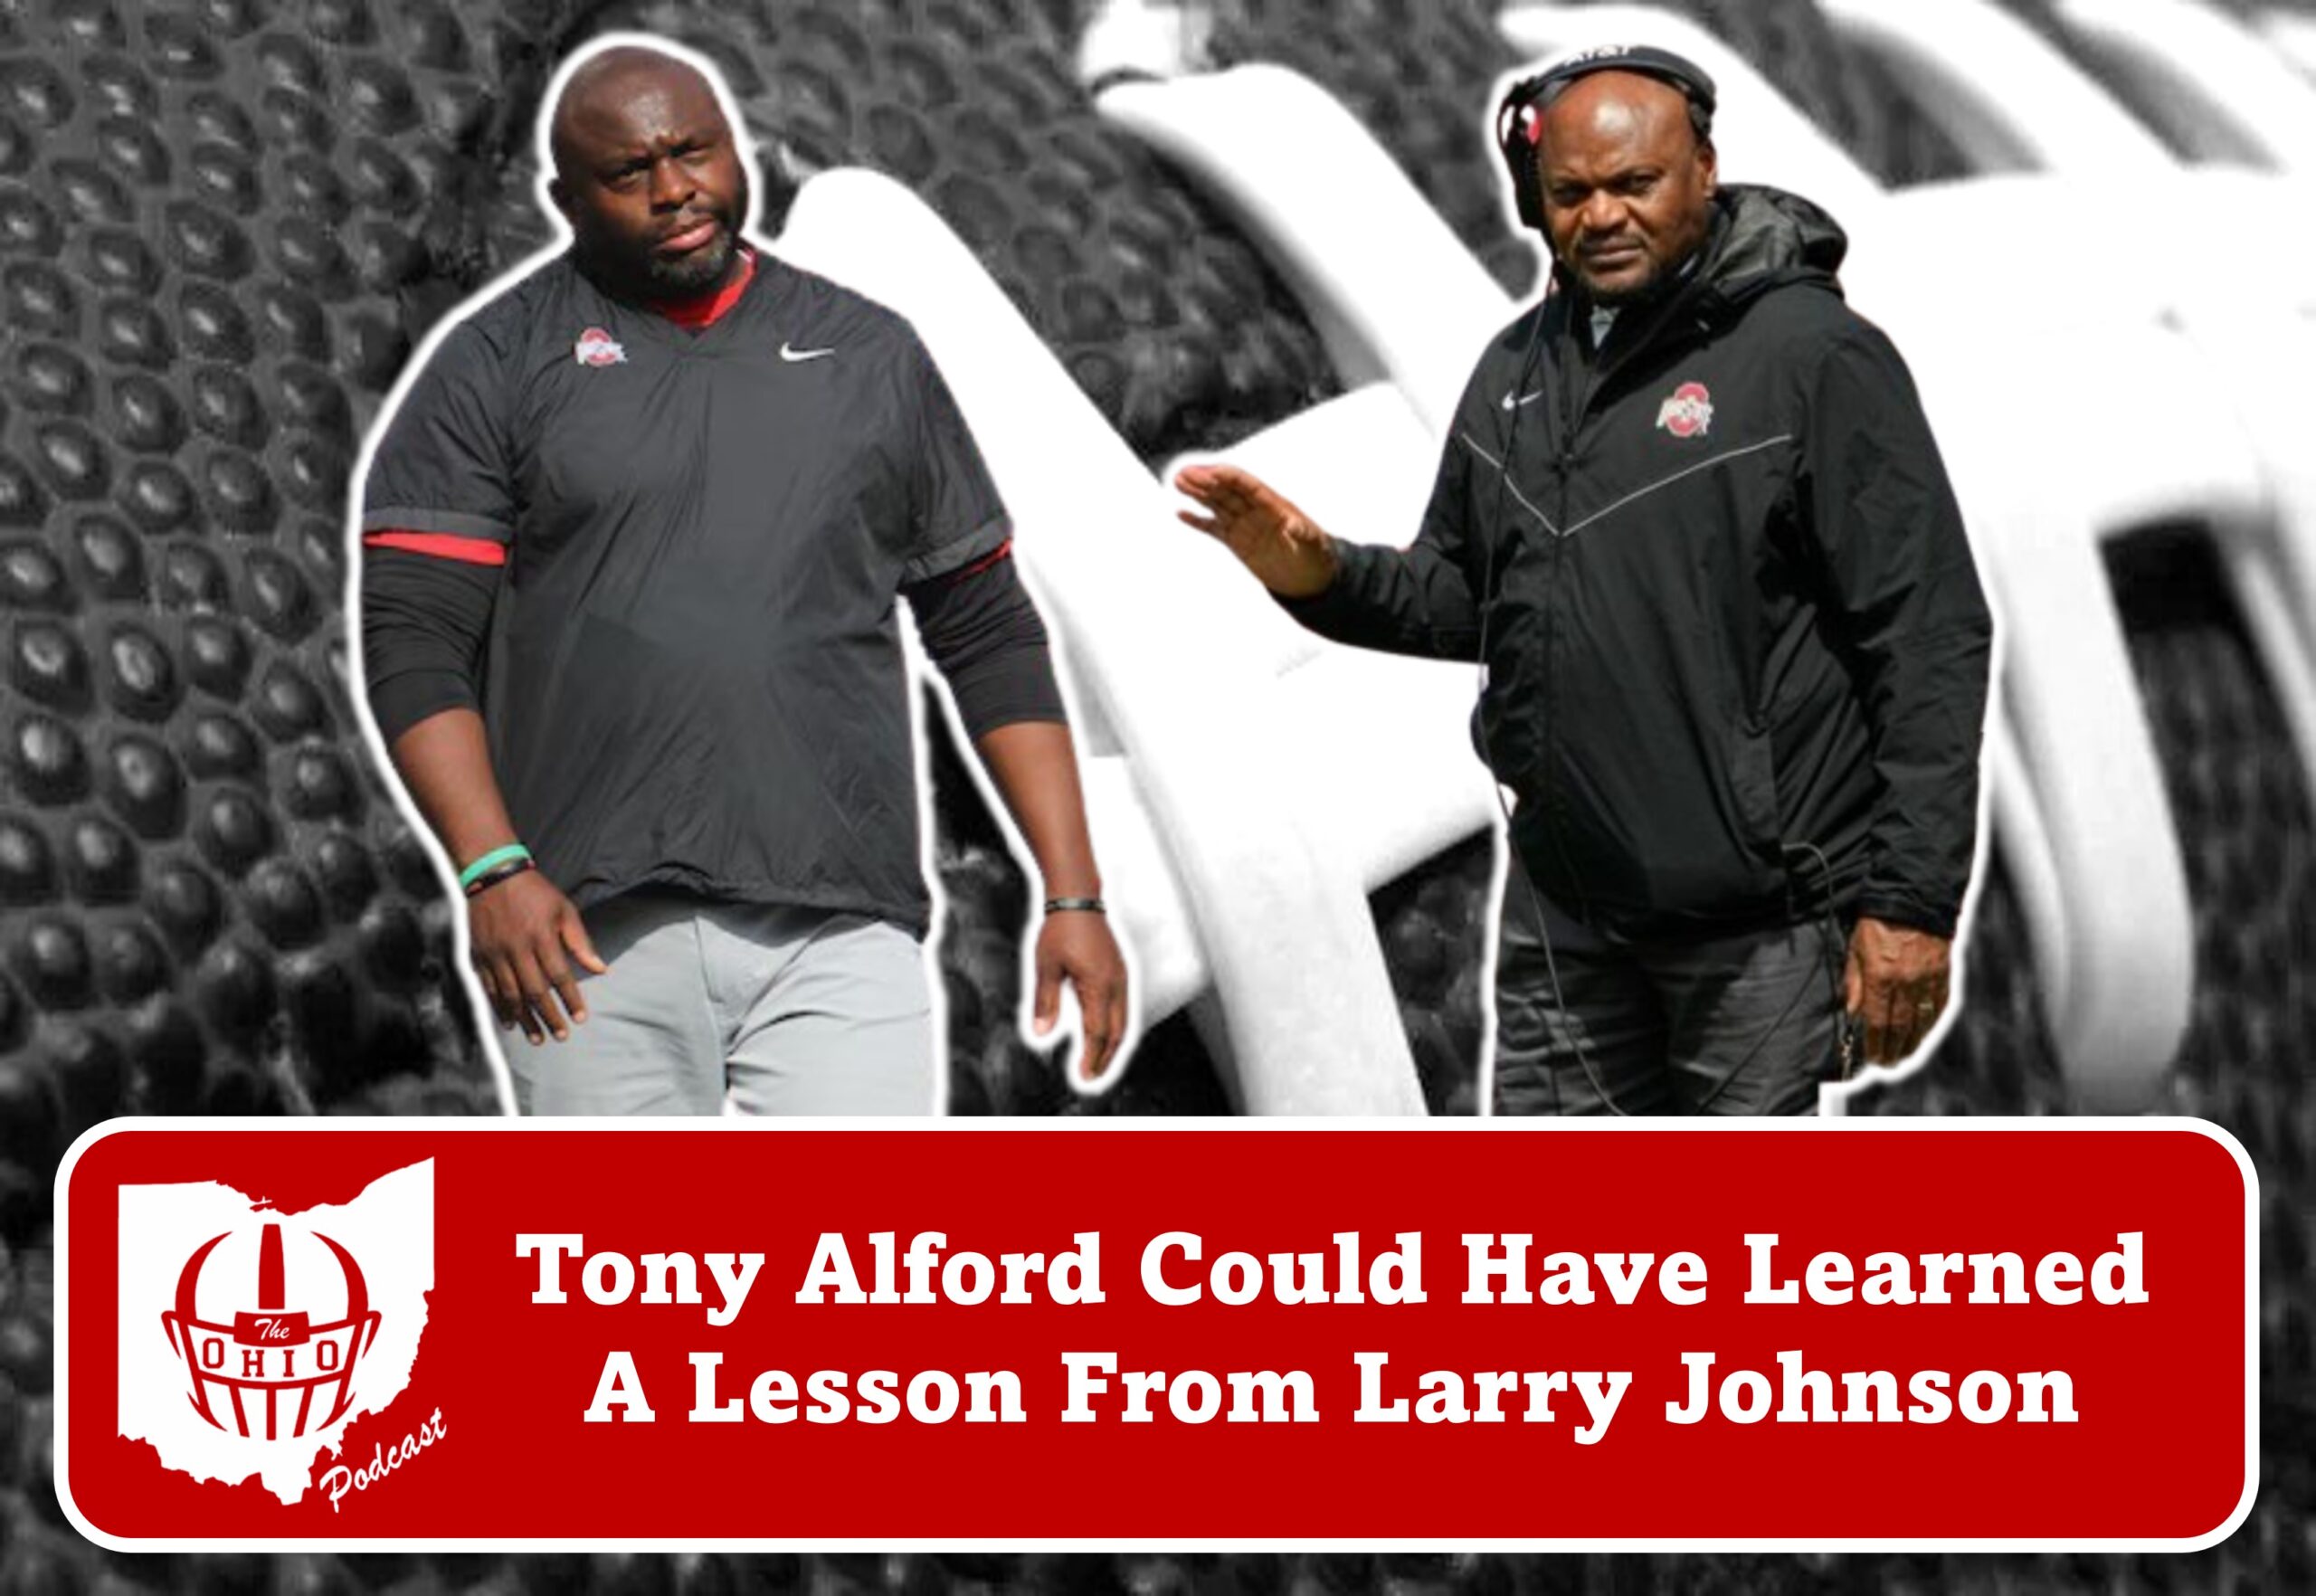 Tony Alford Could Have Learned A Lesson From Larry Johnson